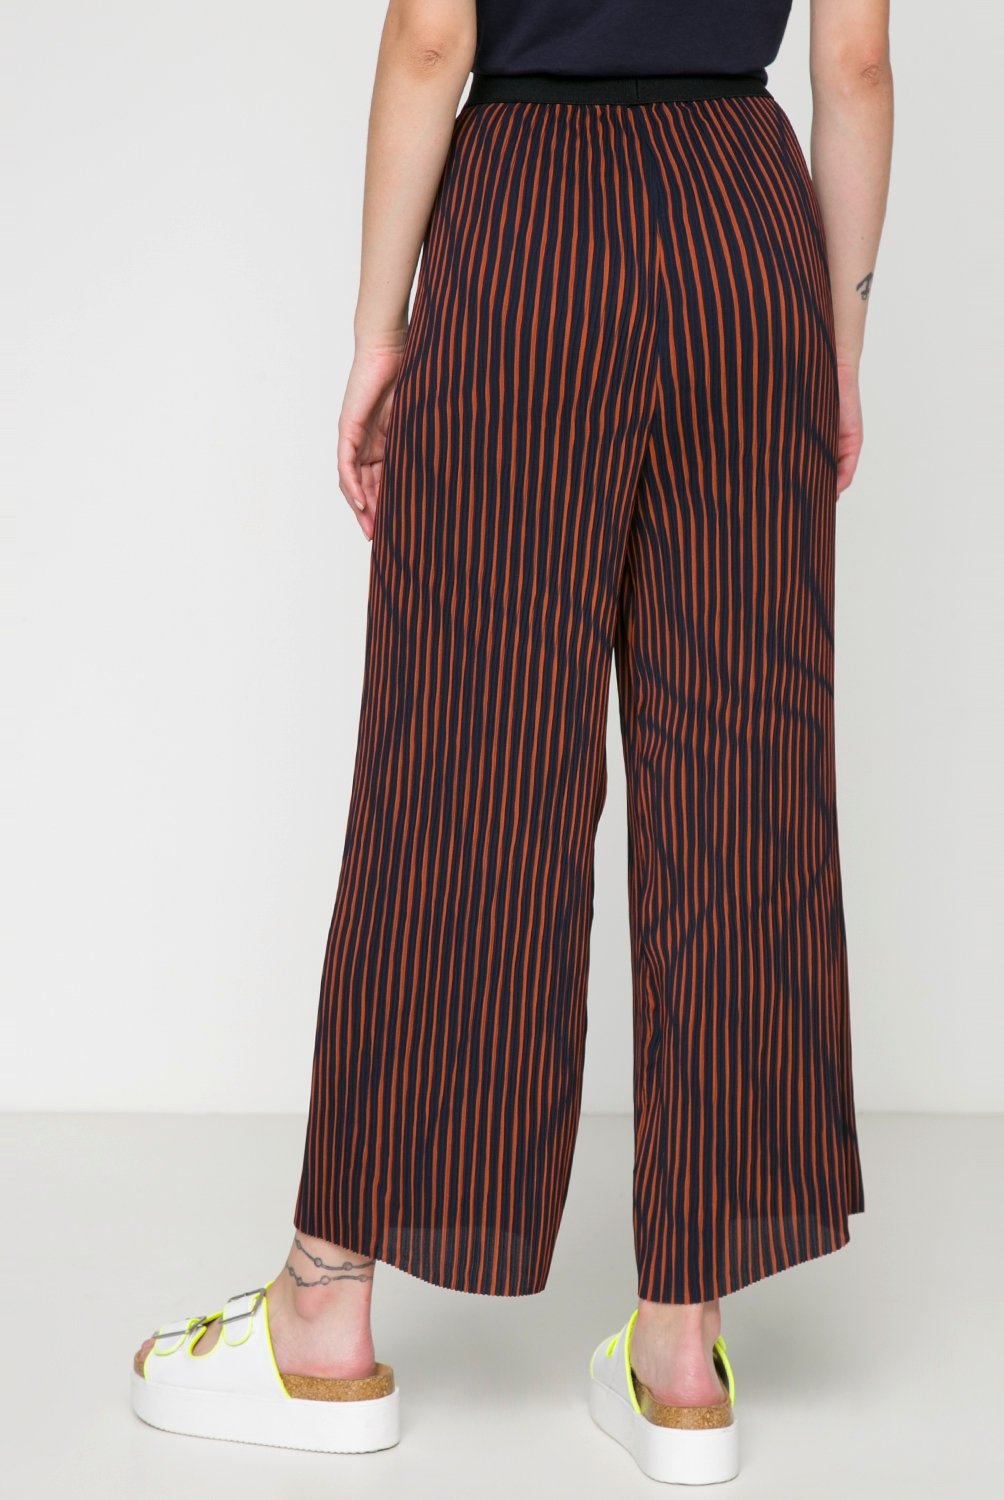 Only - Only Pantalón Cropped Mujer